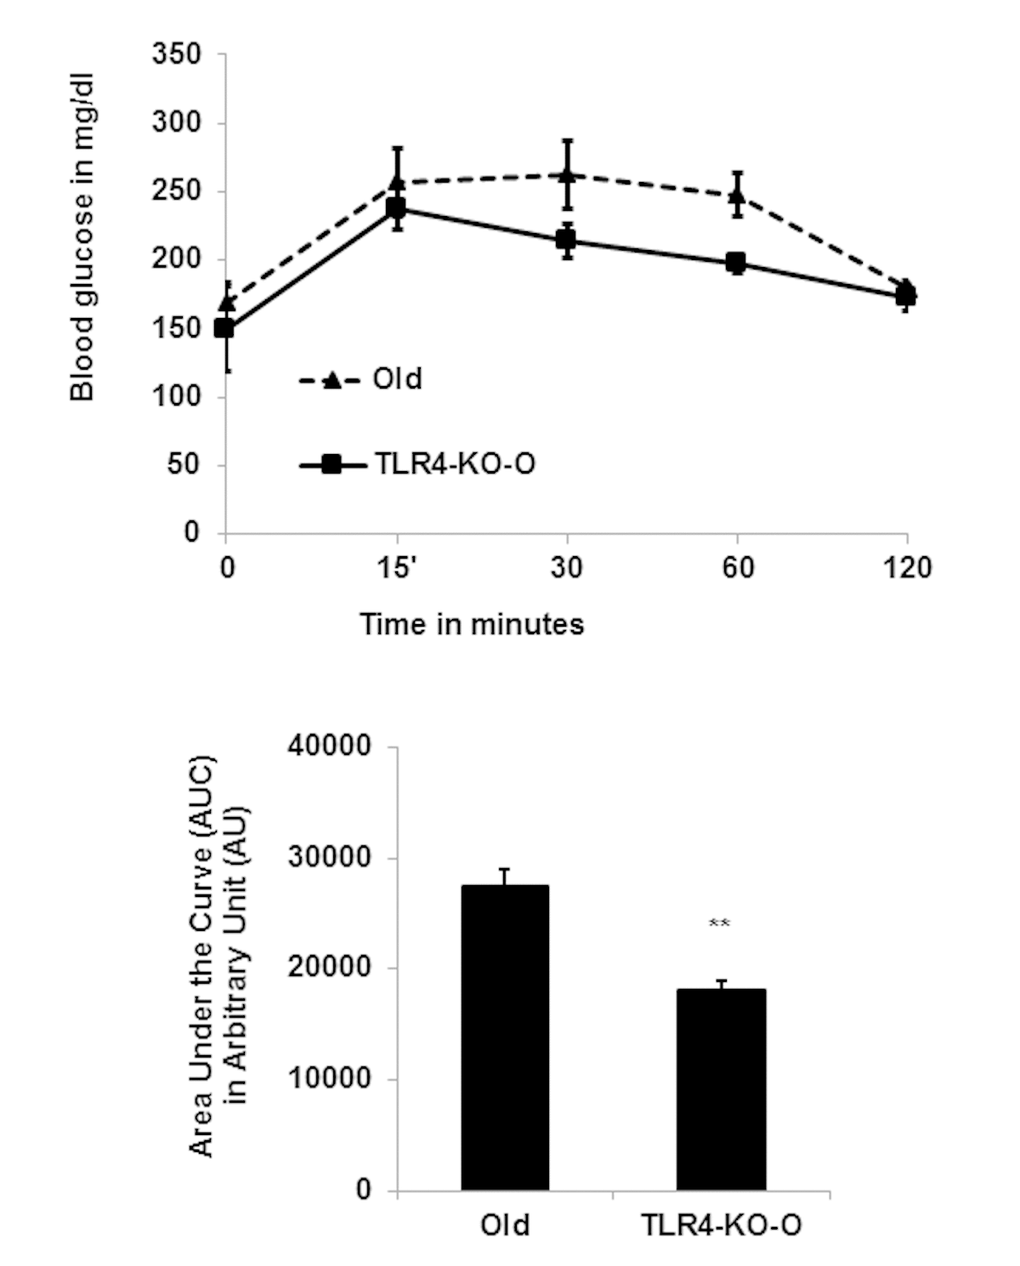 TLR4 deficient mice are more efficient in IPGTT. (A) Time course of blood glucose concentration following intraperitoneal glucose load in old WT and in TLR4 deficient mice. The area under the curve (AUC) were calculated using the trapezoidal formula and plotted in the bar diagram (B). Data represented in bar diagrams are mean + SD of three independent experiments with WT and TLR4-KO mice (n=4). Significance of difference between means was determined by Student’s t-test and indicated **p